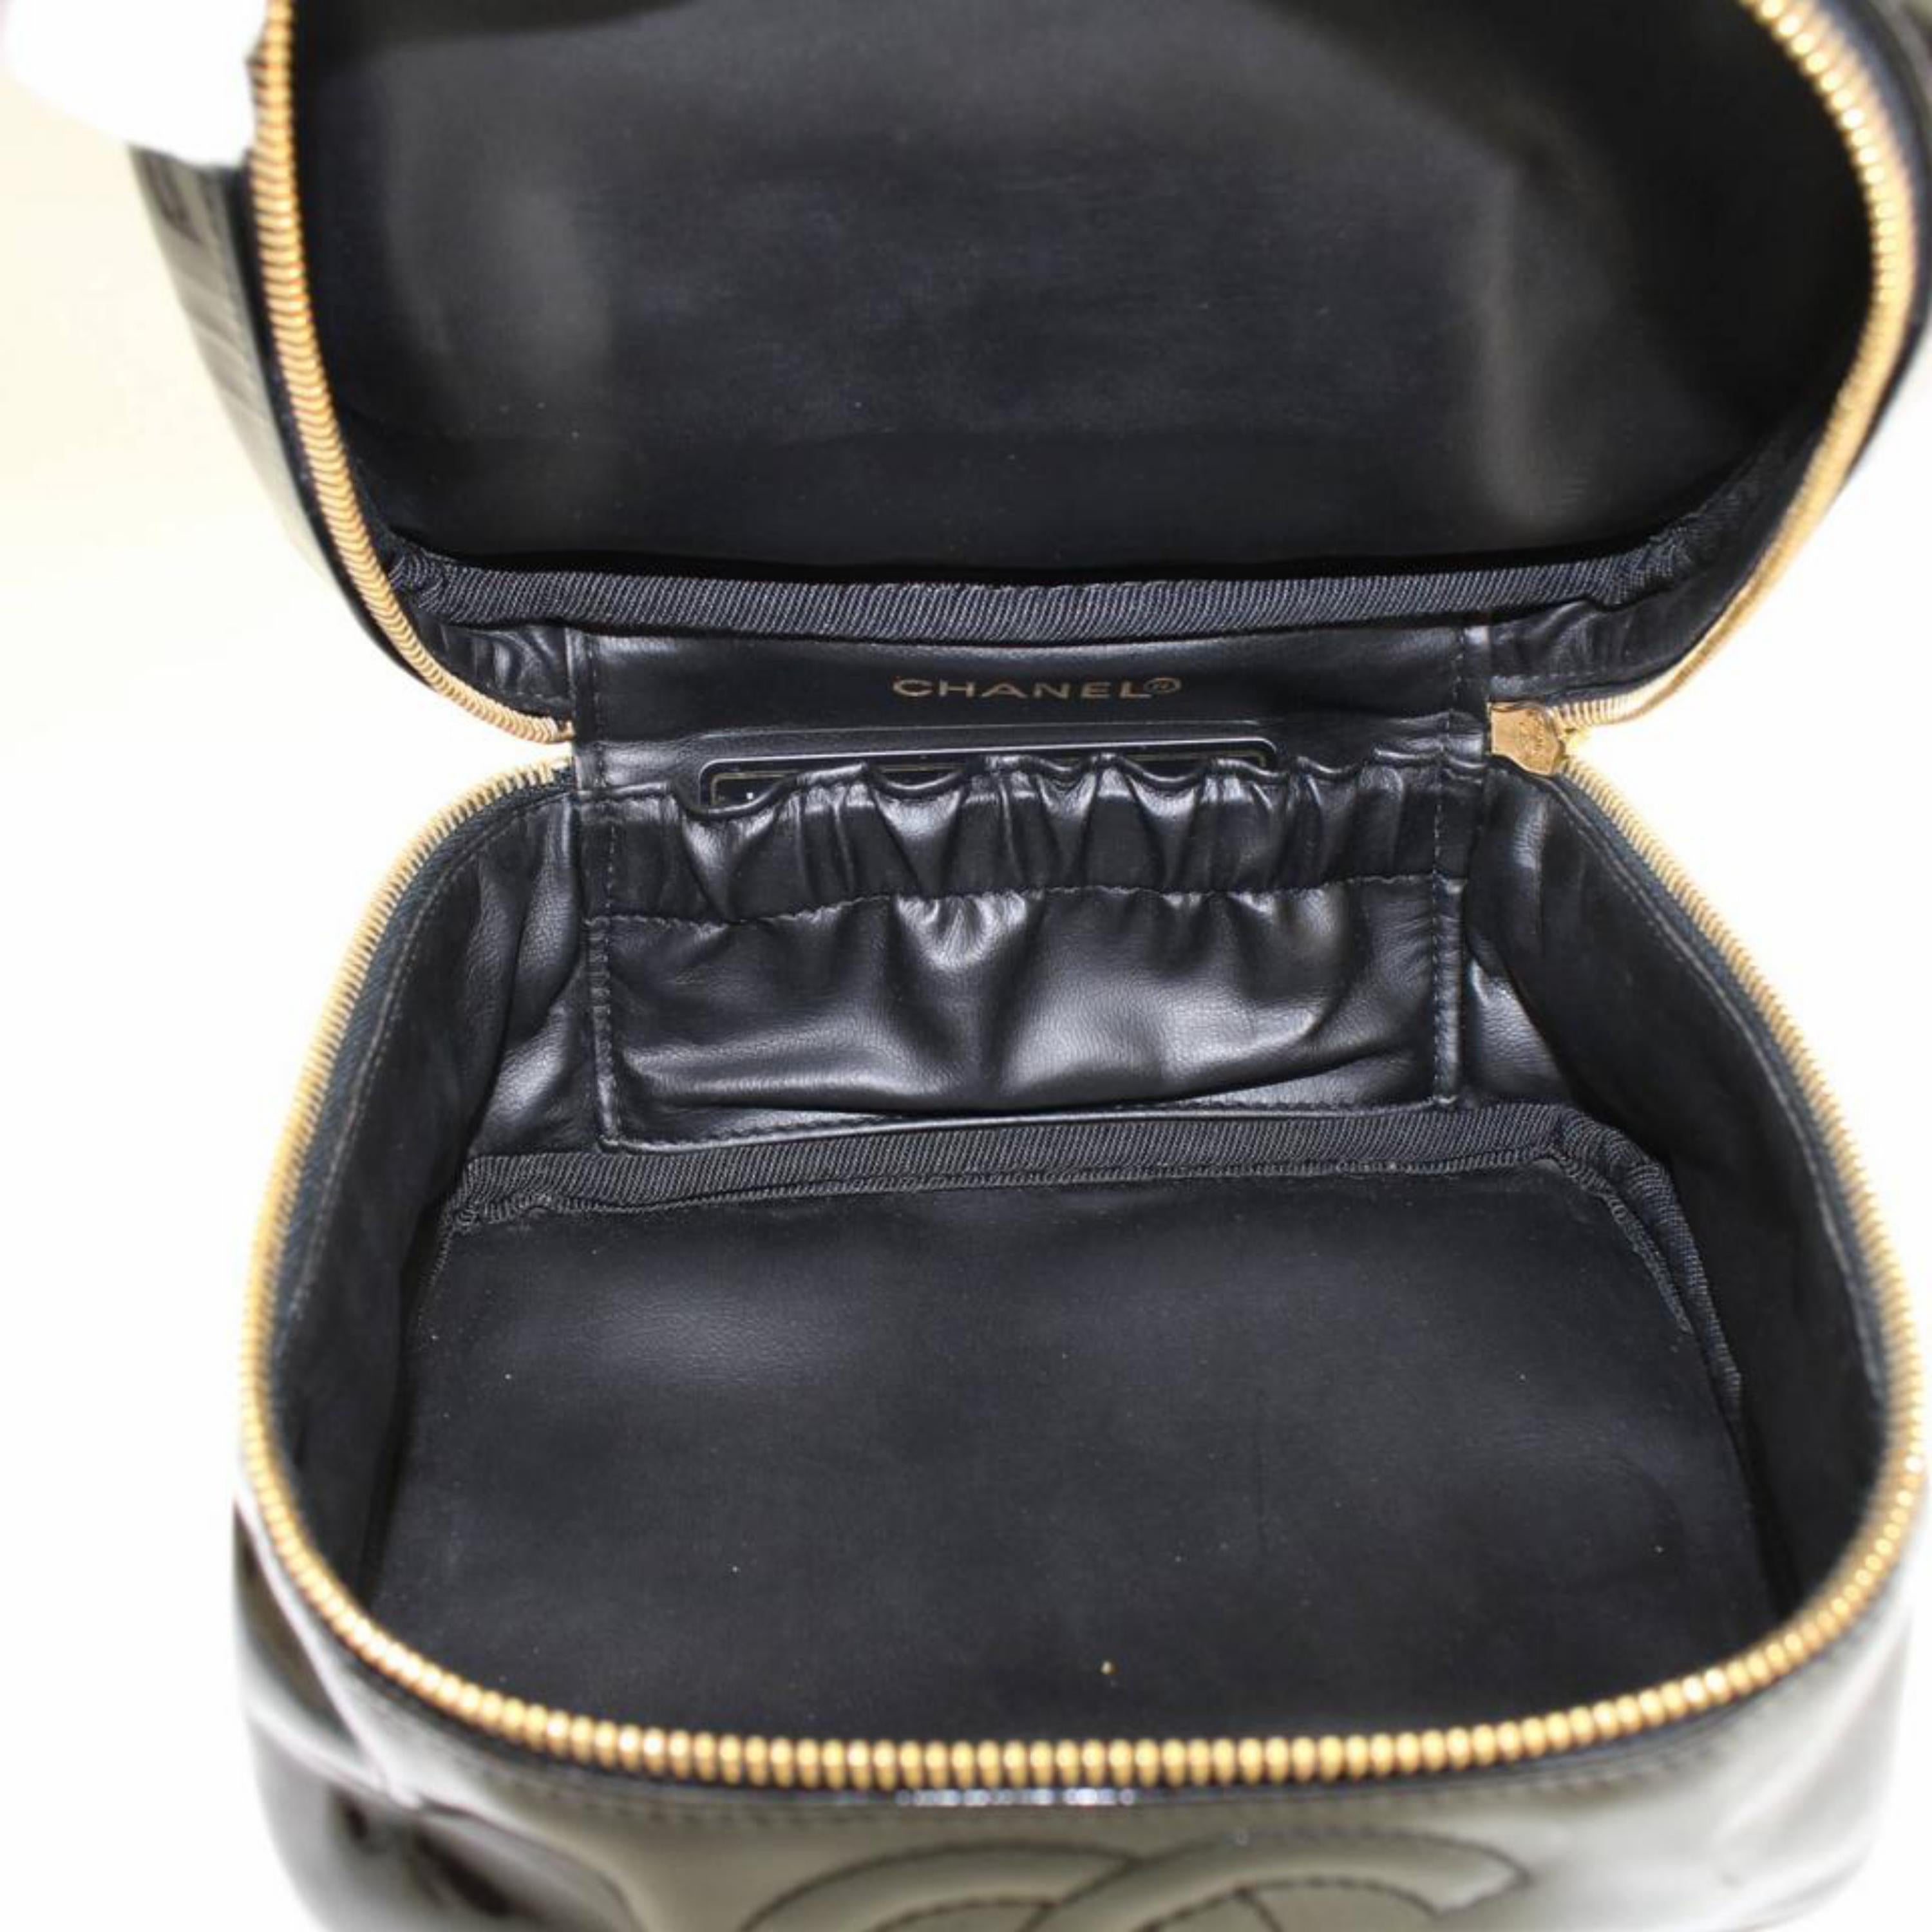 Chanel Black Patent Cc Logo Vanity Case868327 Cosmetic Bag In Good Condition For Sale In Forest Hills, NY